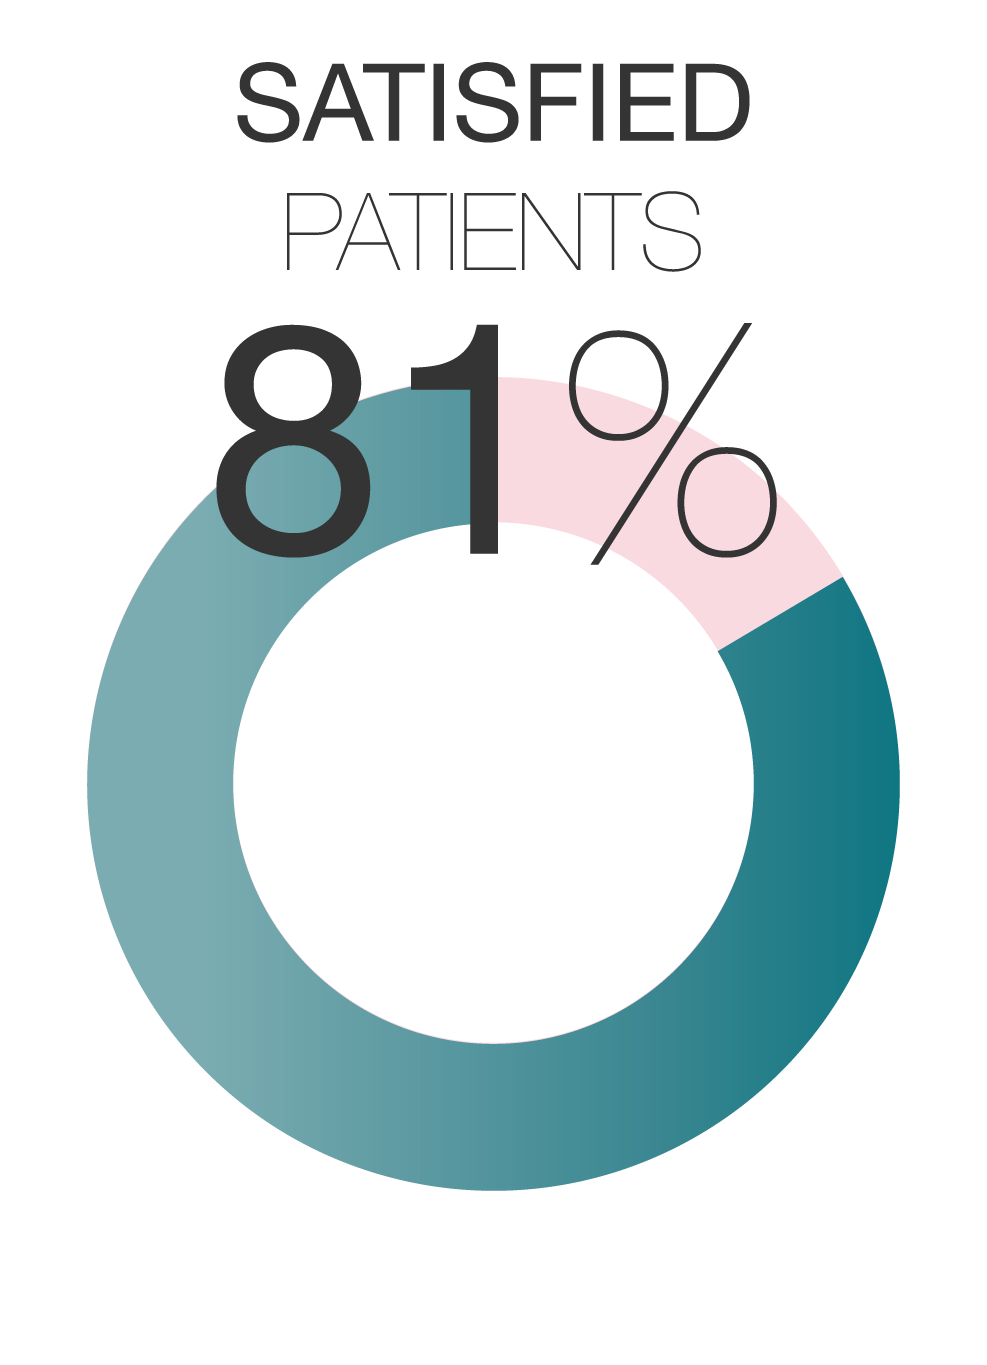 Cefaly : Satisfied patients: 81%